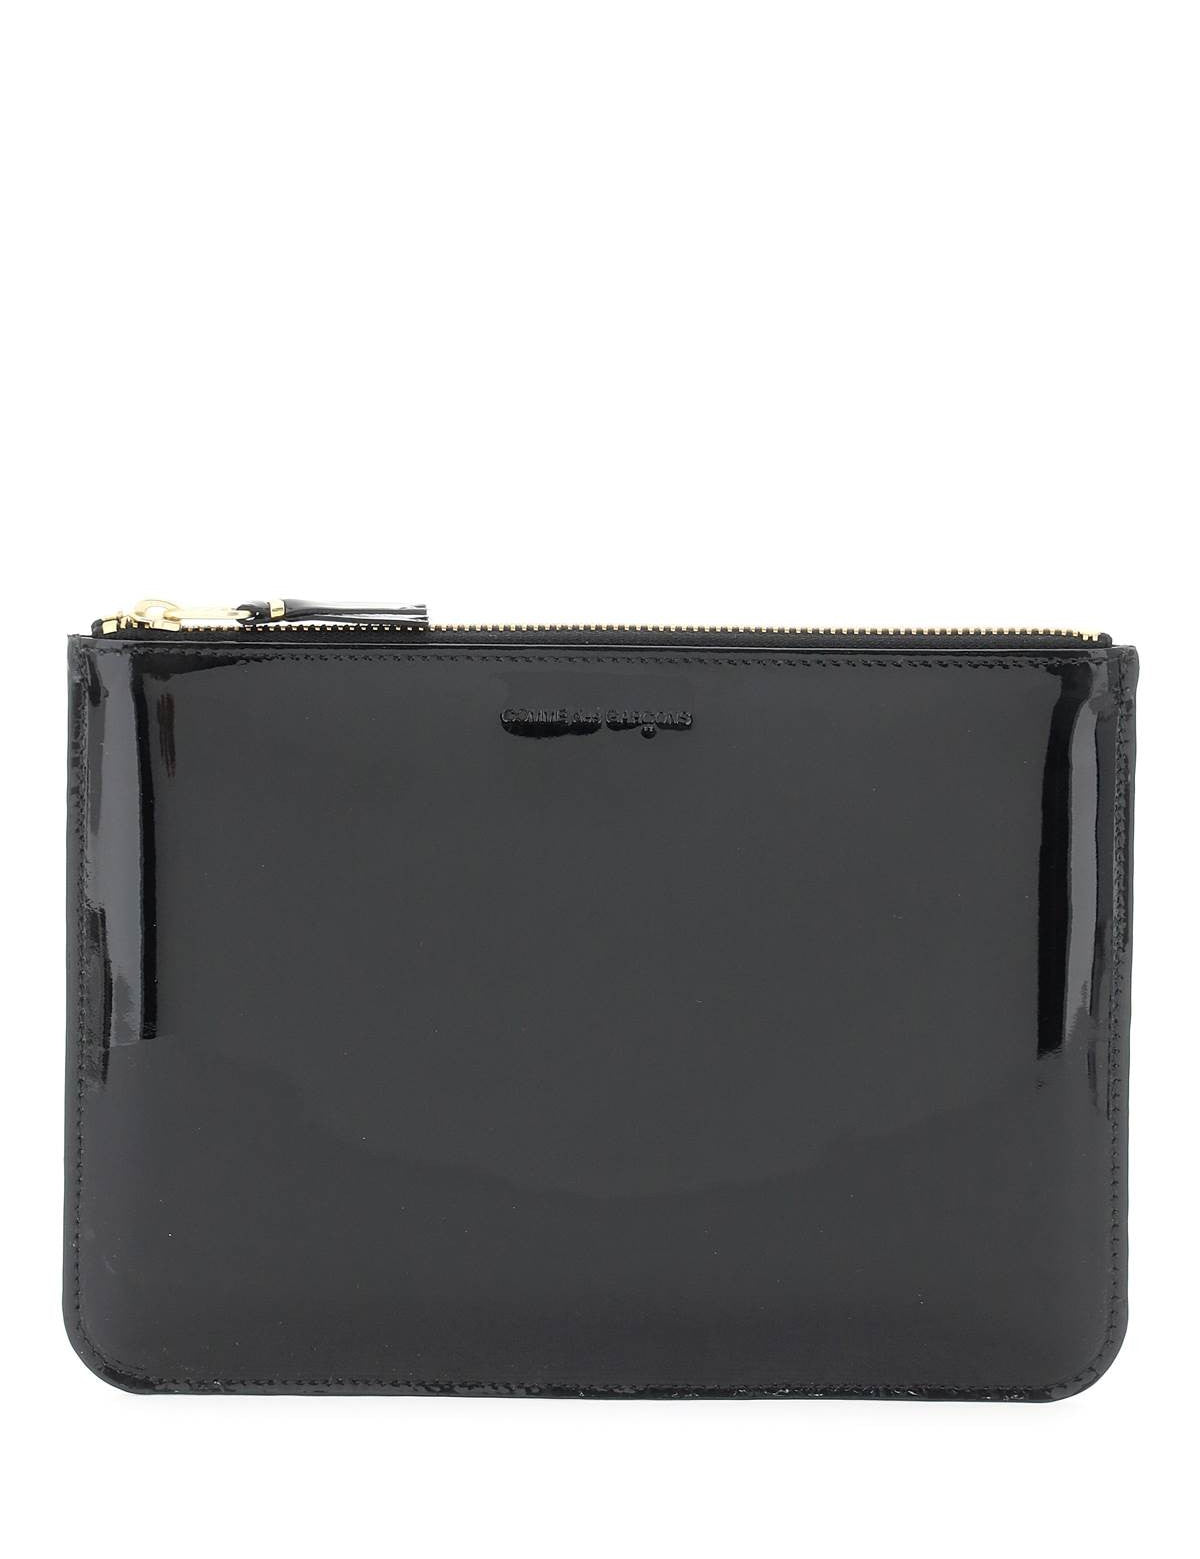 comme-des-garcons-wallet-glossy-leather-pouc.jpg